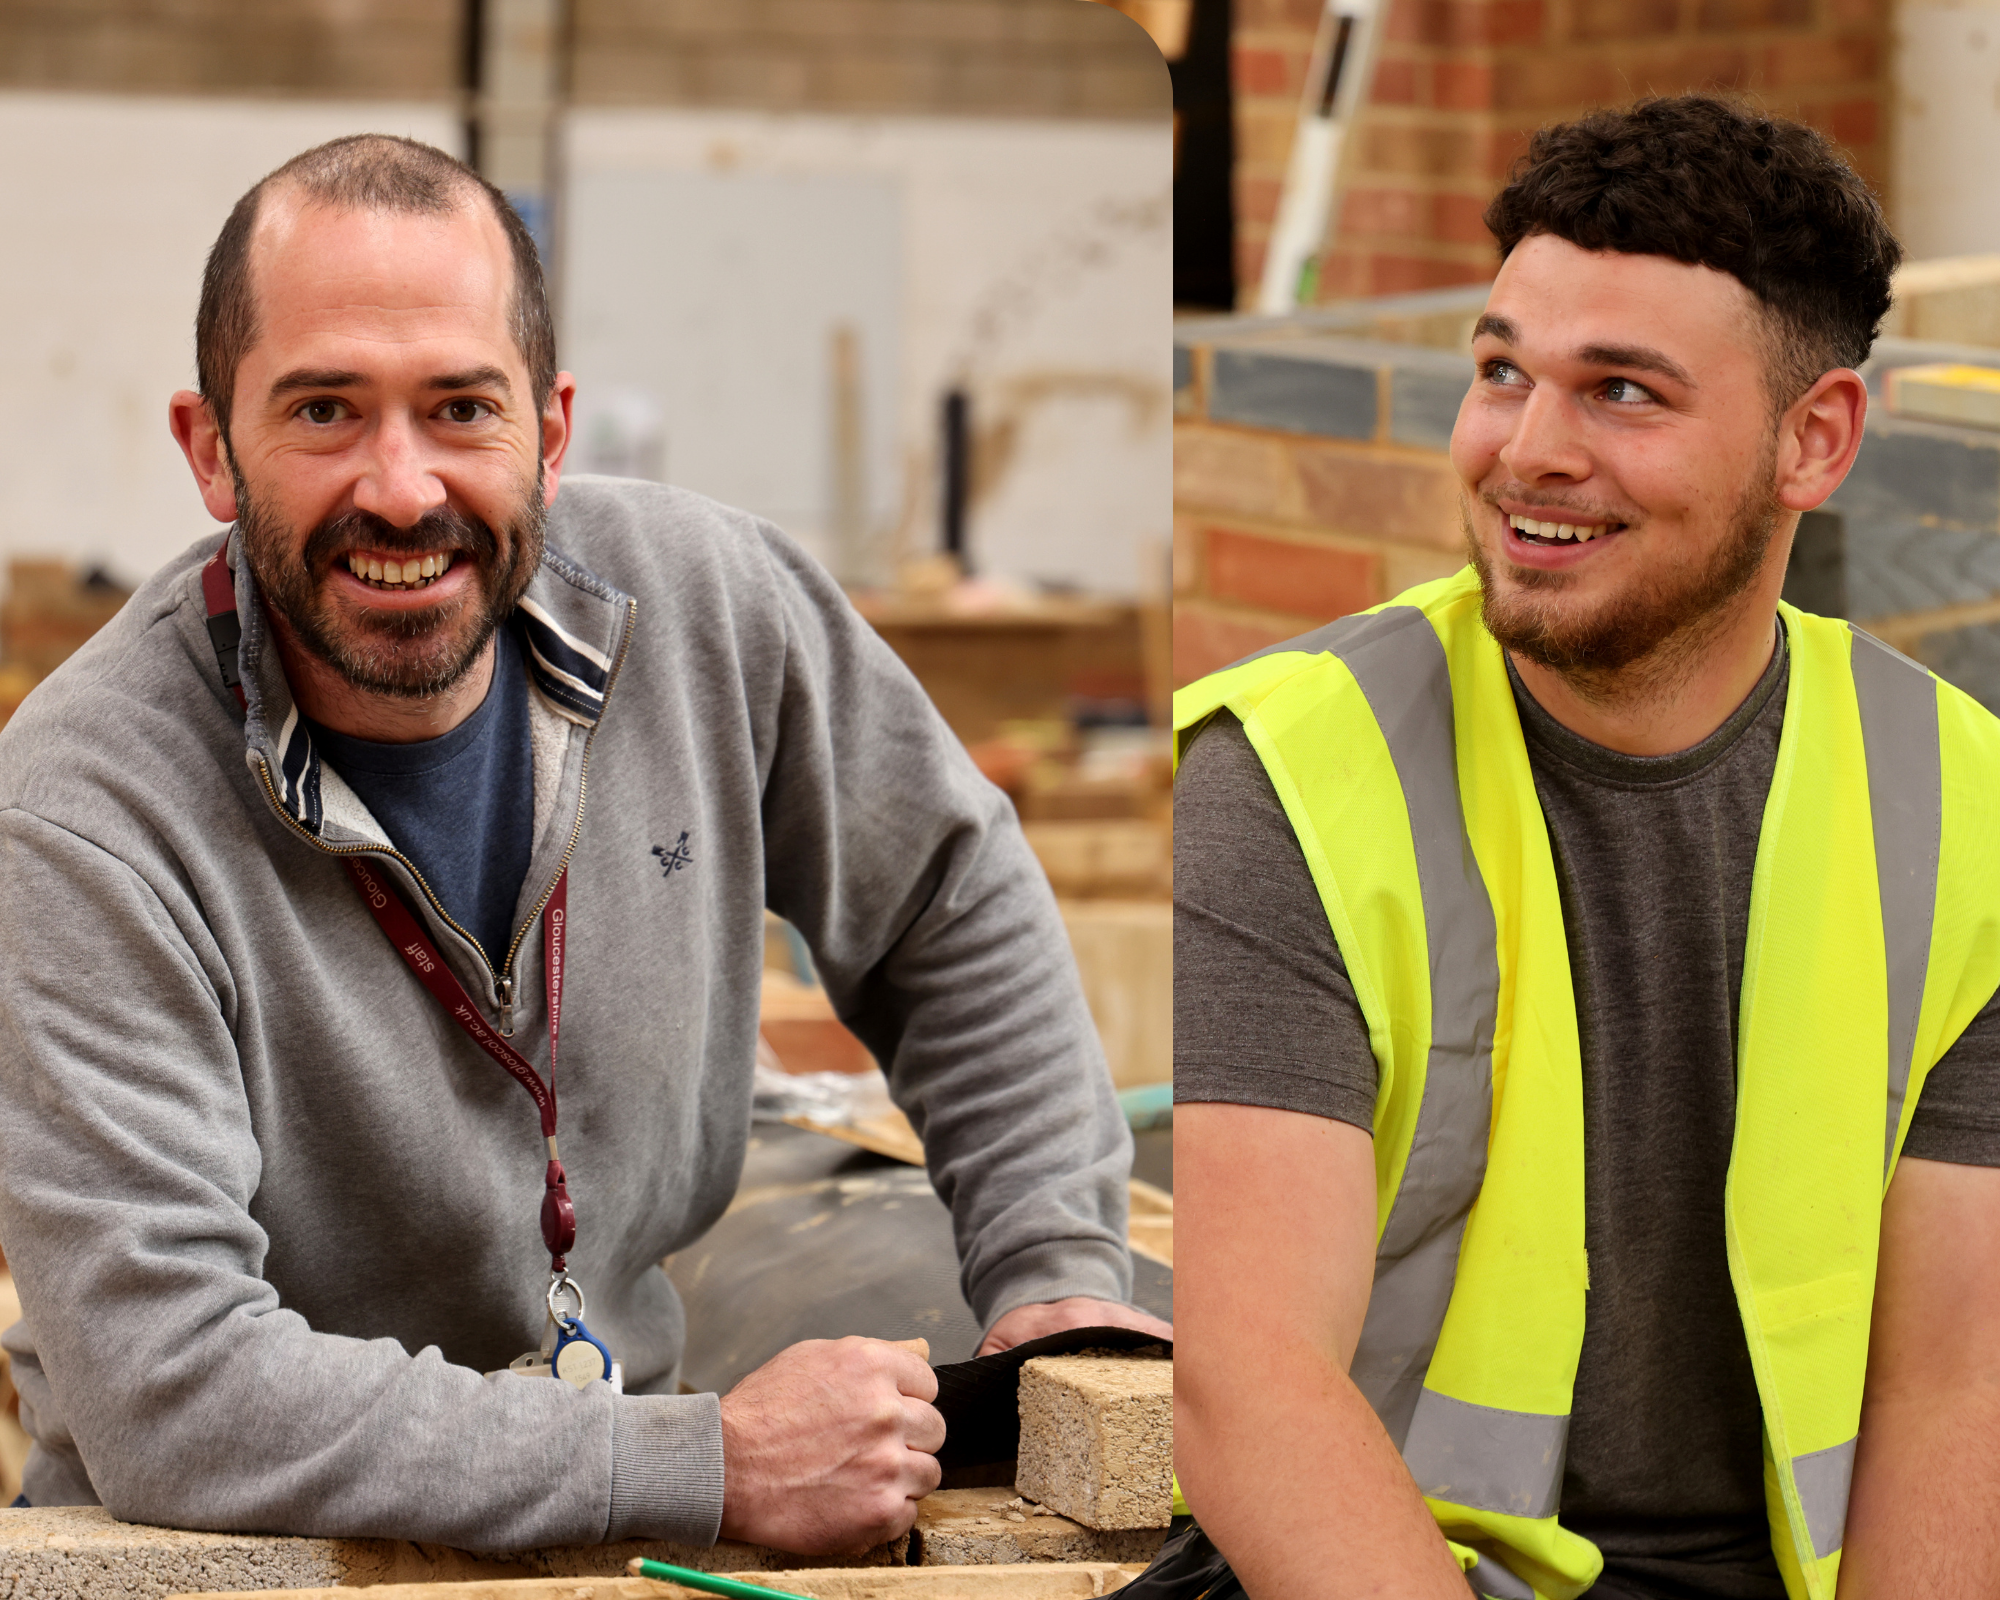 Speak directly to the employers to recruit apprentices